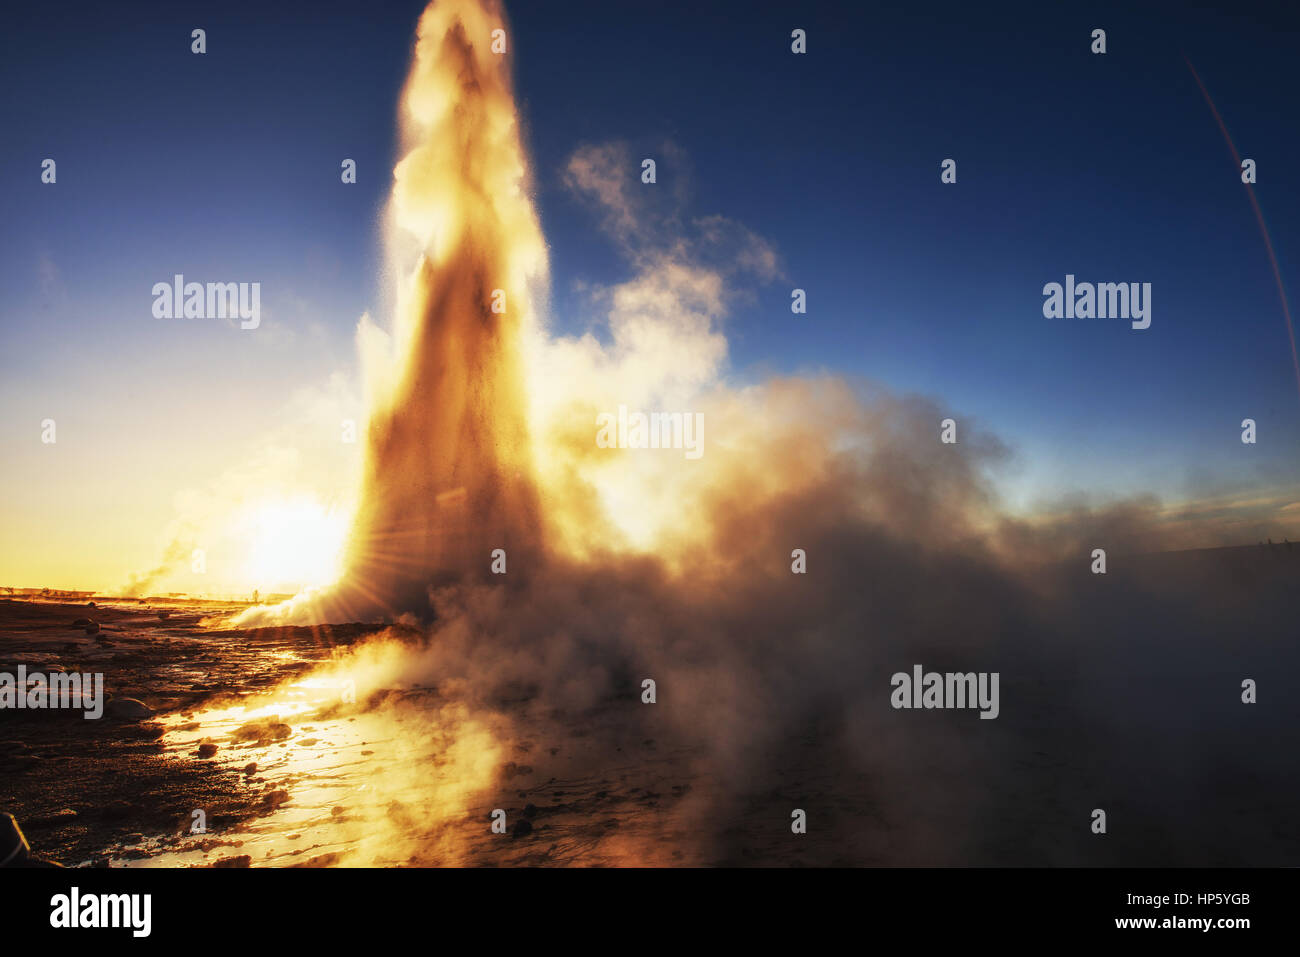 geysers in Iceland. Fantastic kolory.Turysty watch the beauty of Stock Photo